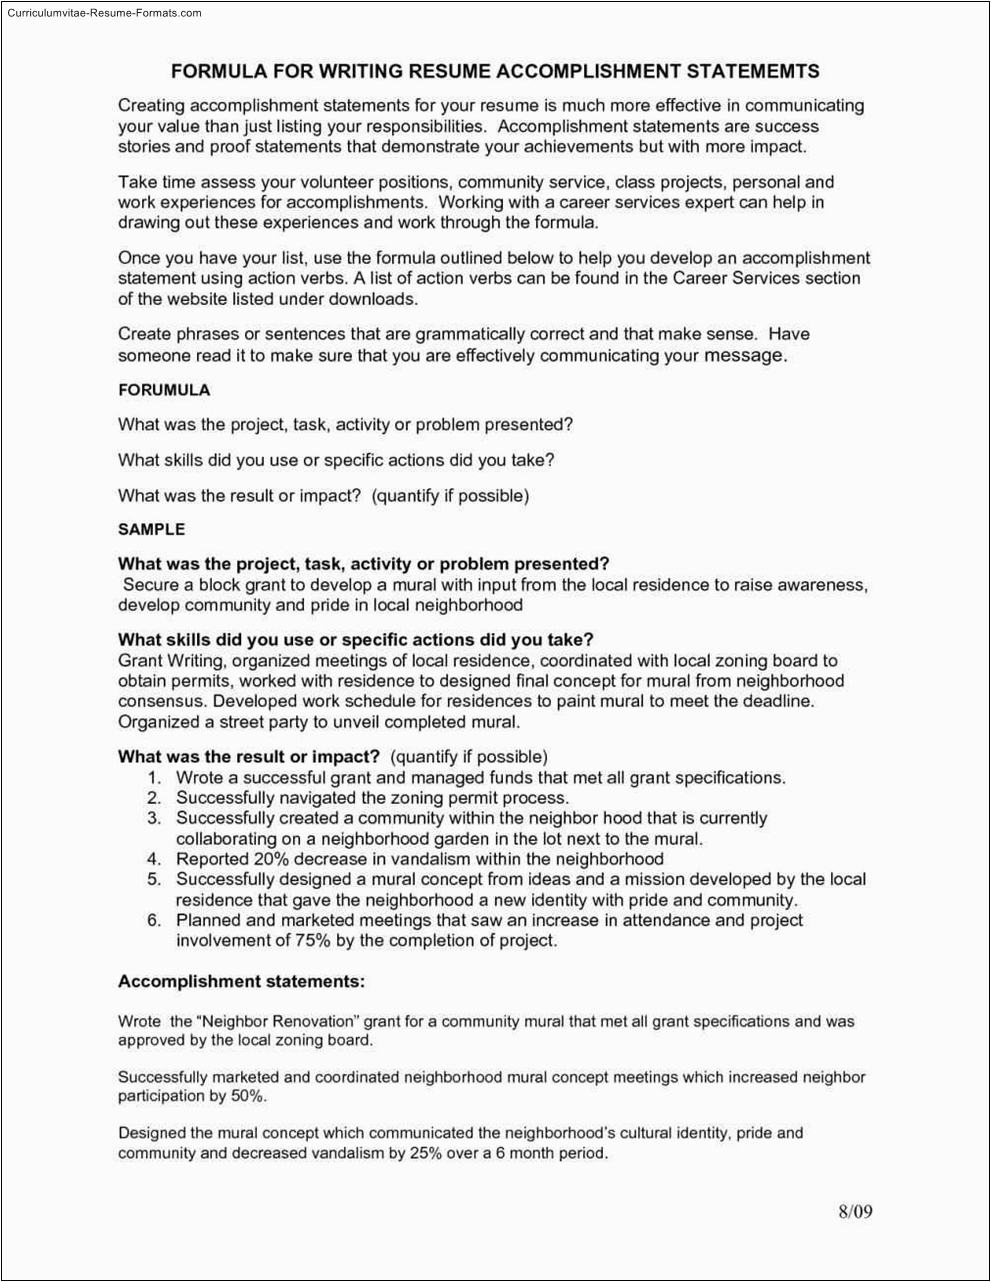 Sample Resume with A Section On Accomplishments Ac Plishment Resume Template